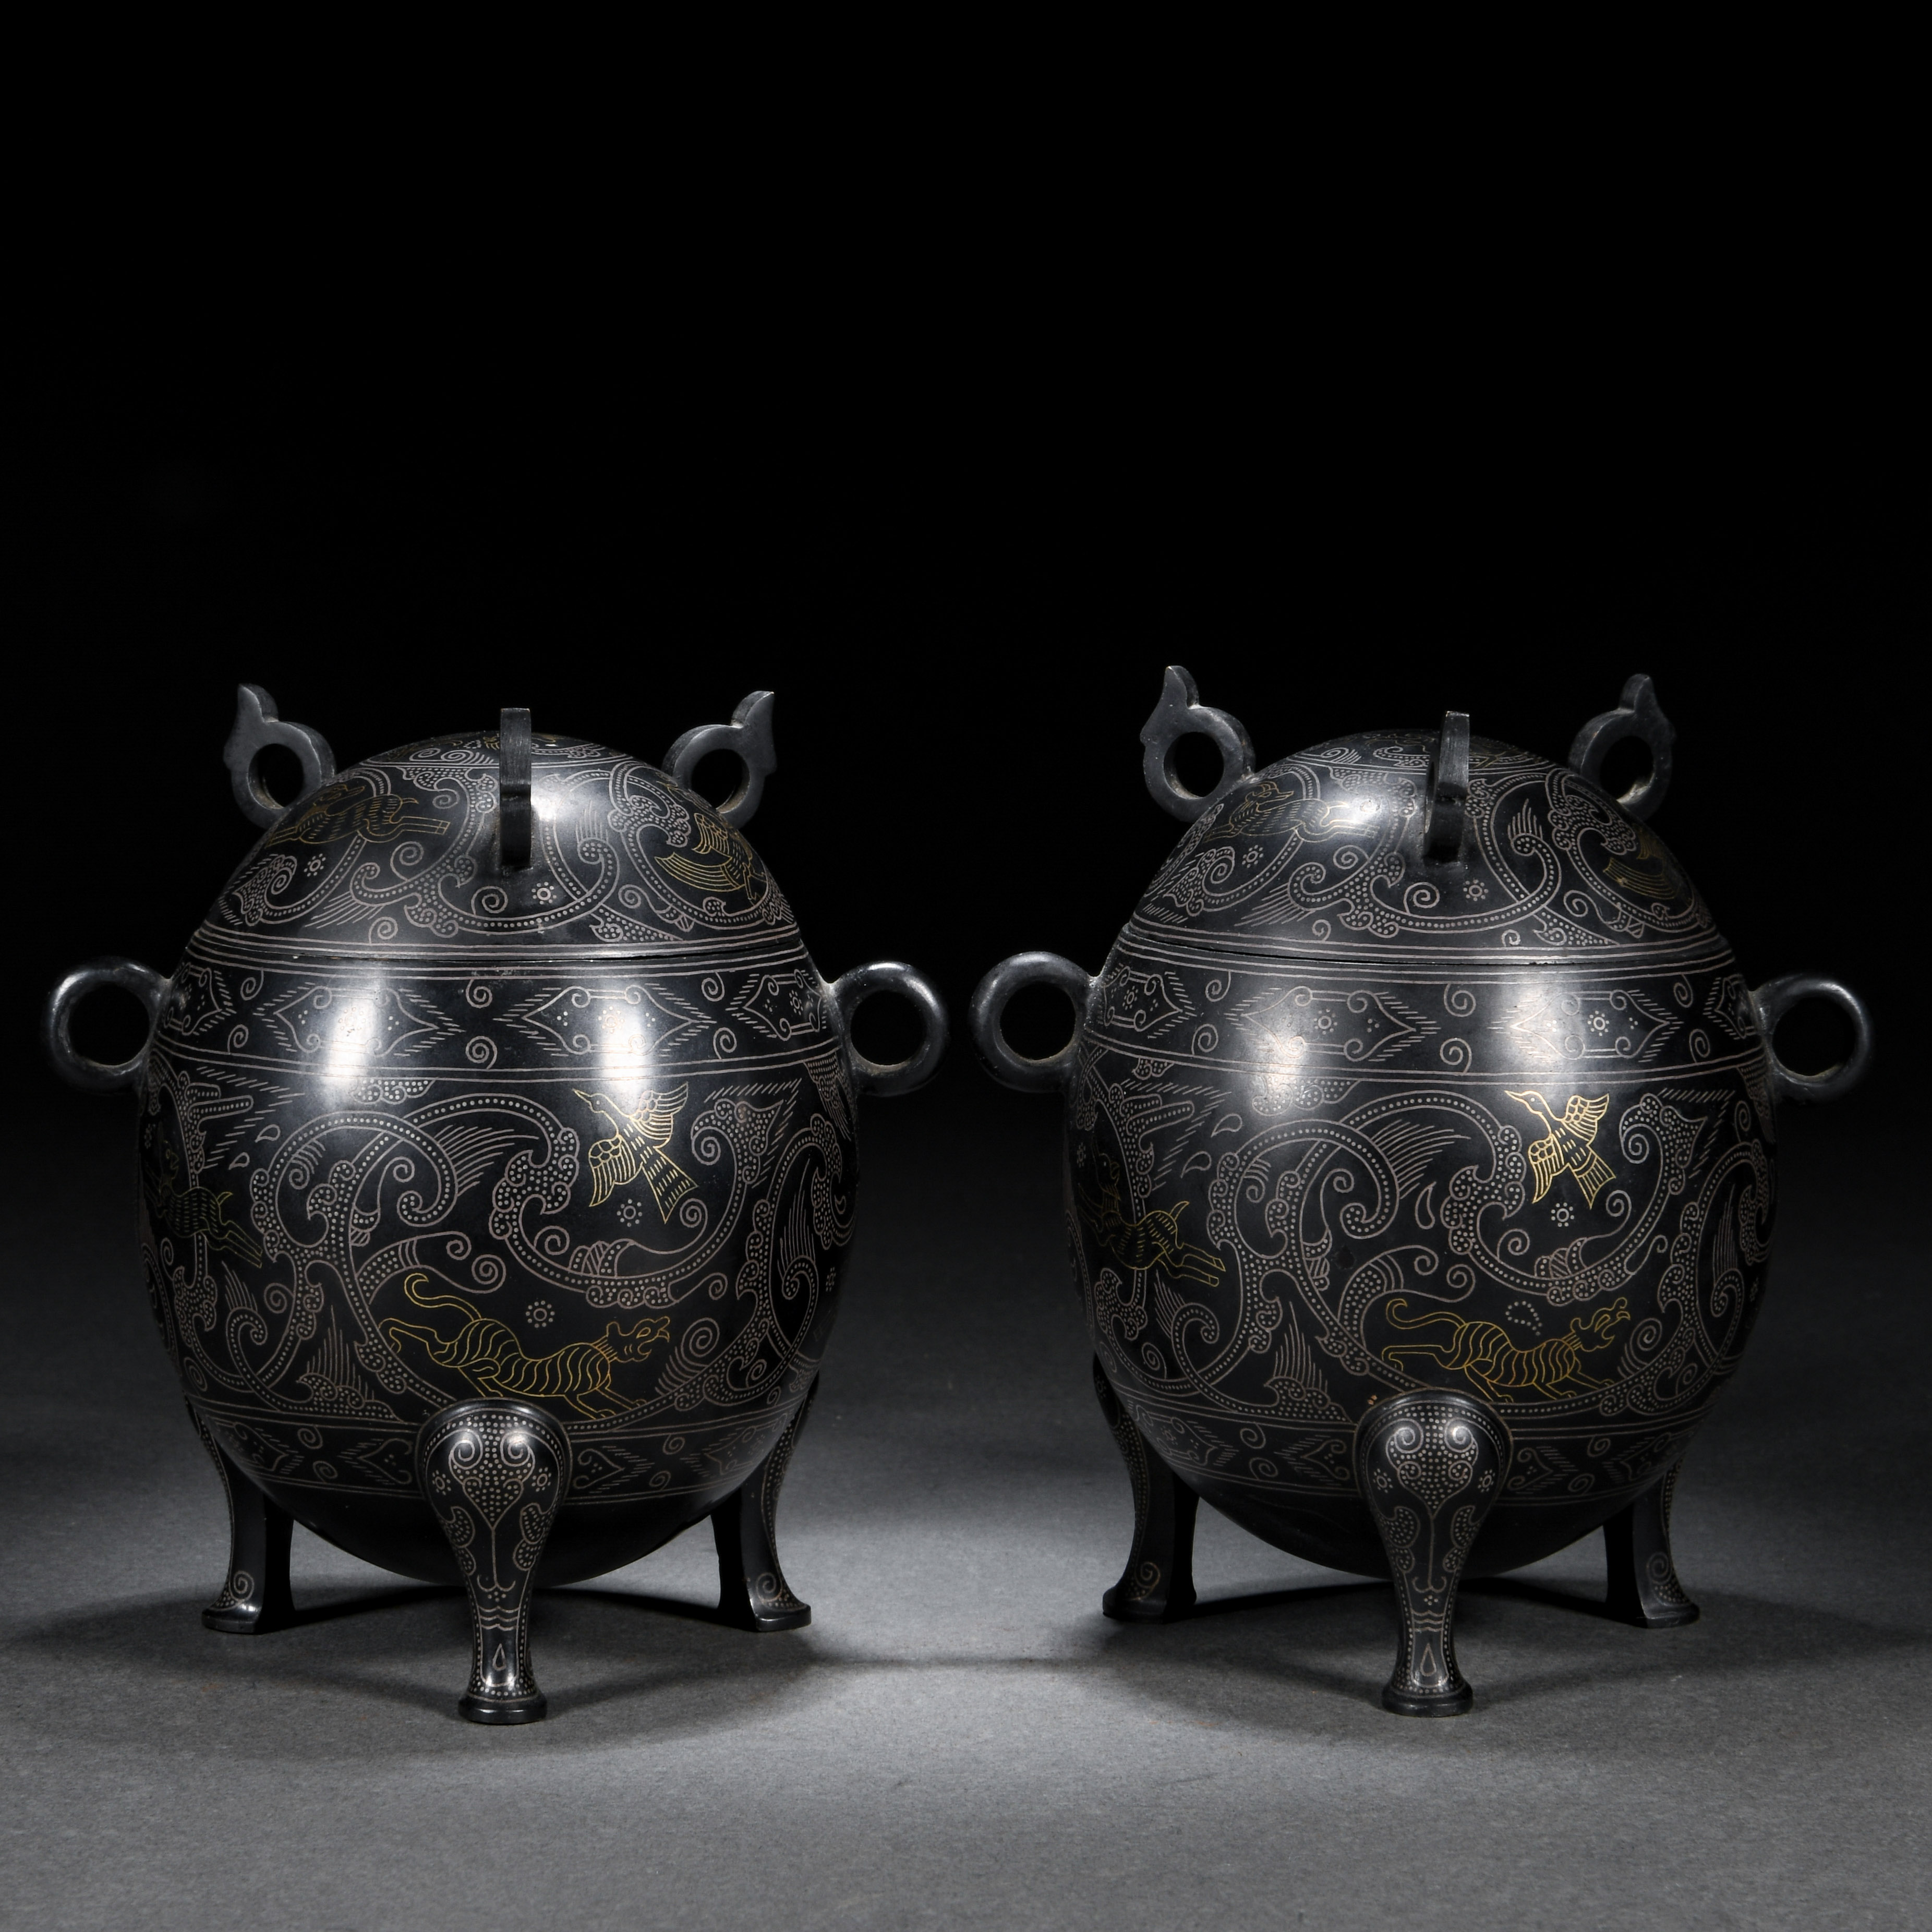 A Chinese Gold and Silver Decorated Vessels Dou